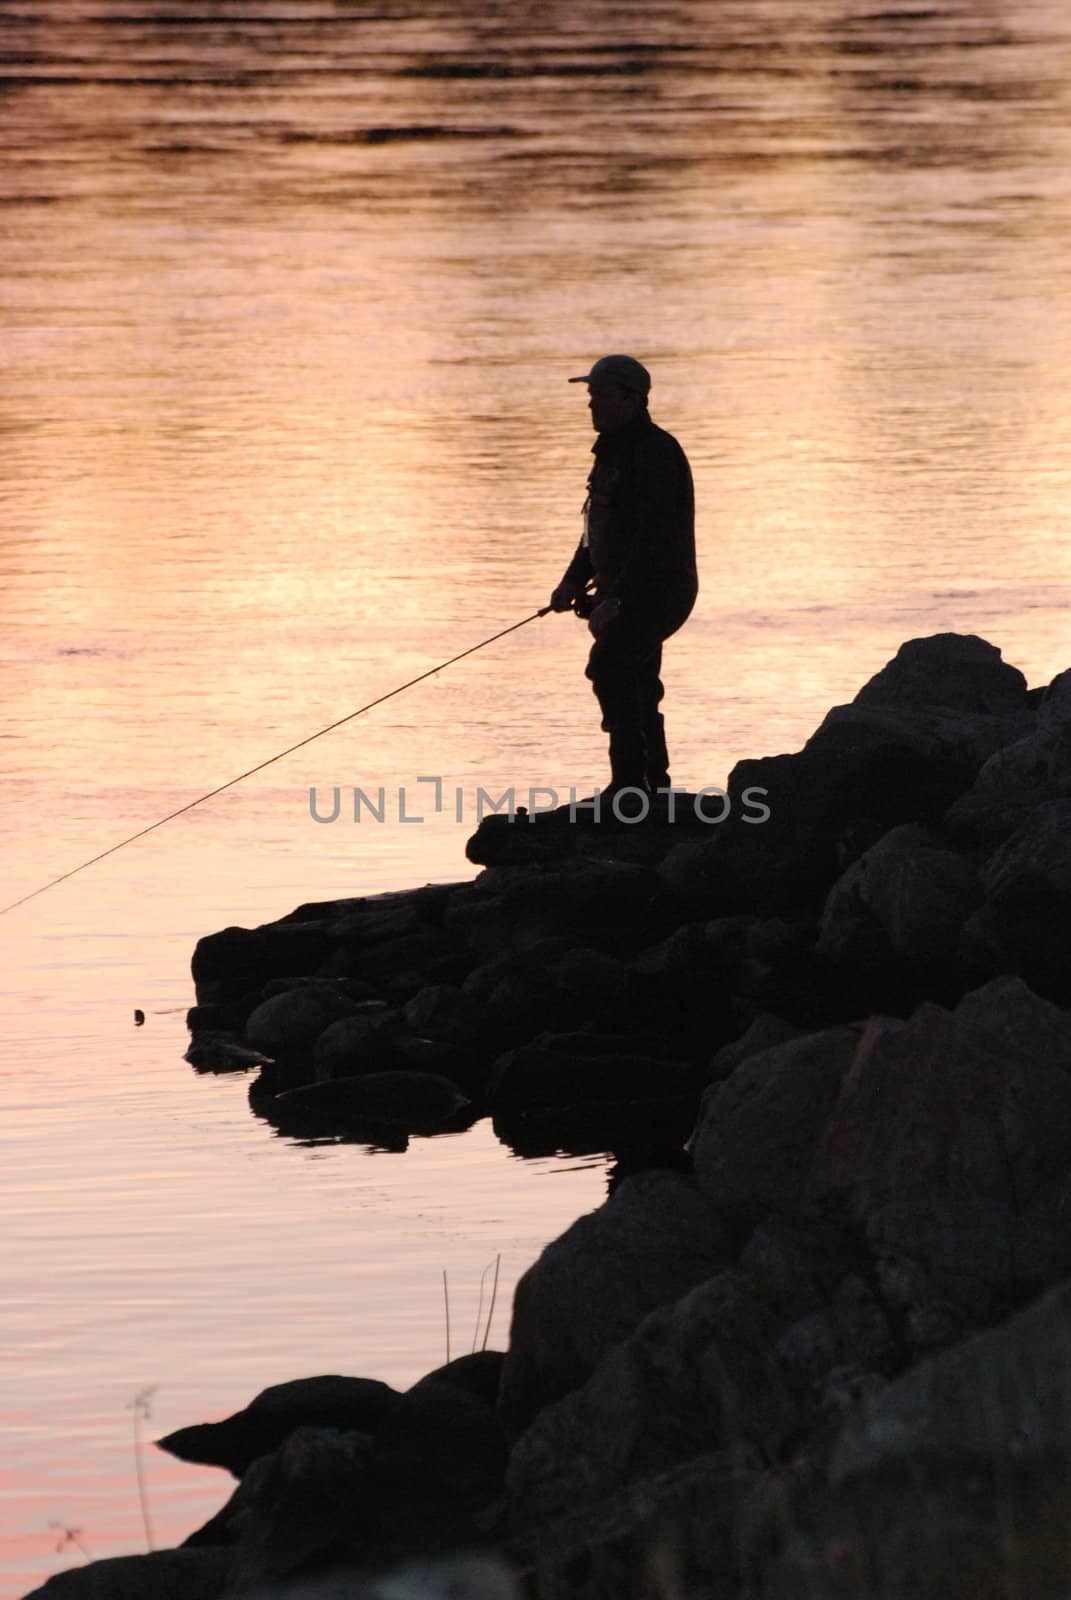 A fisherman in evening light